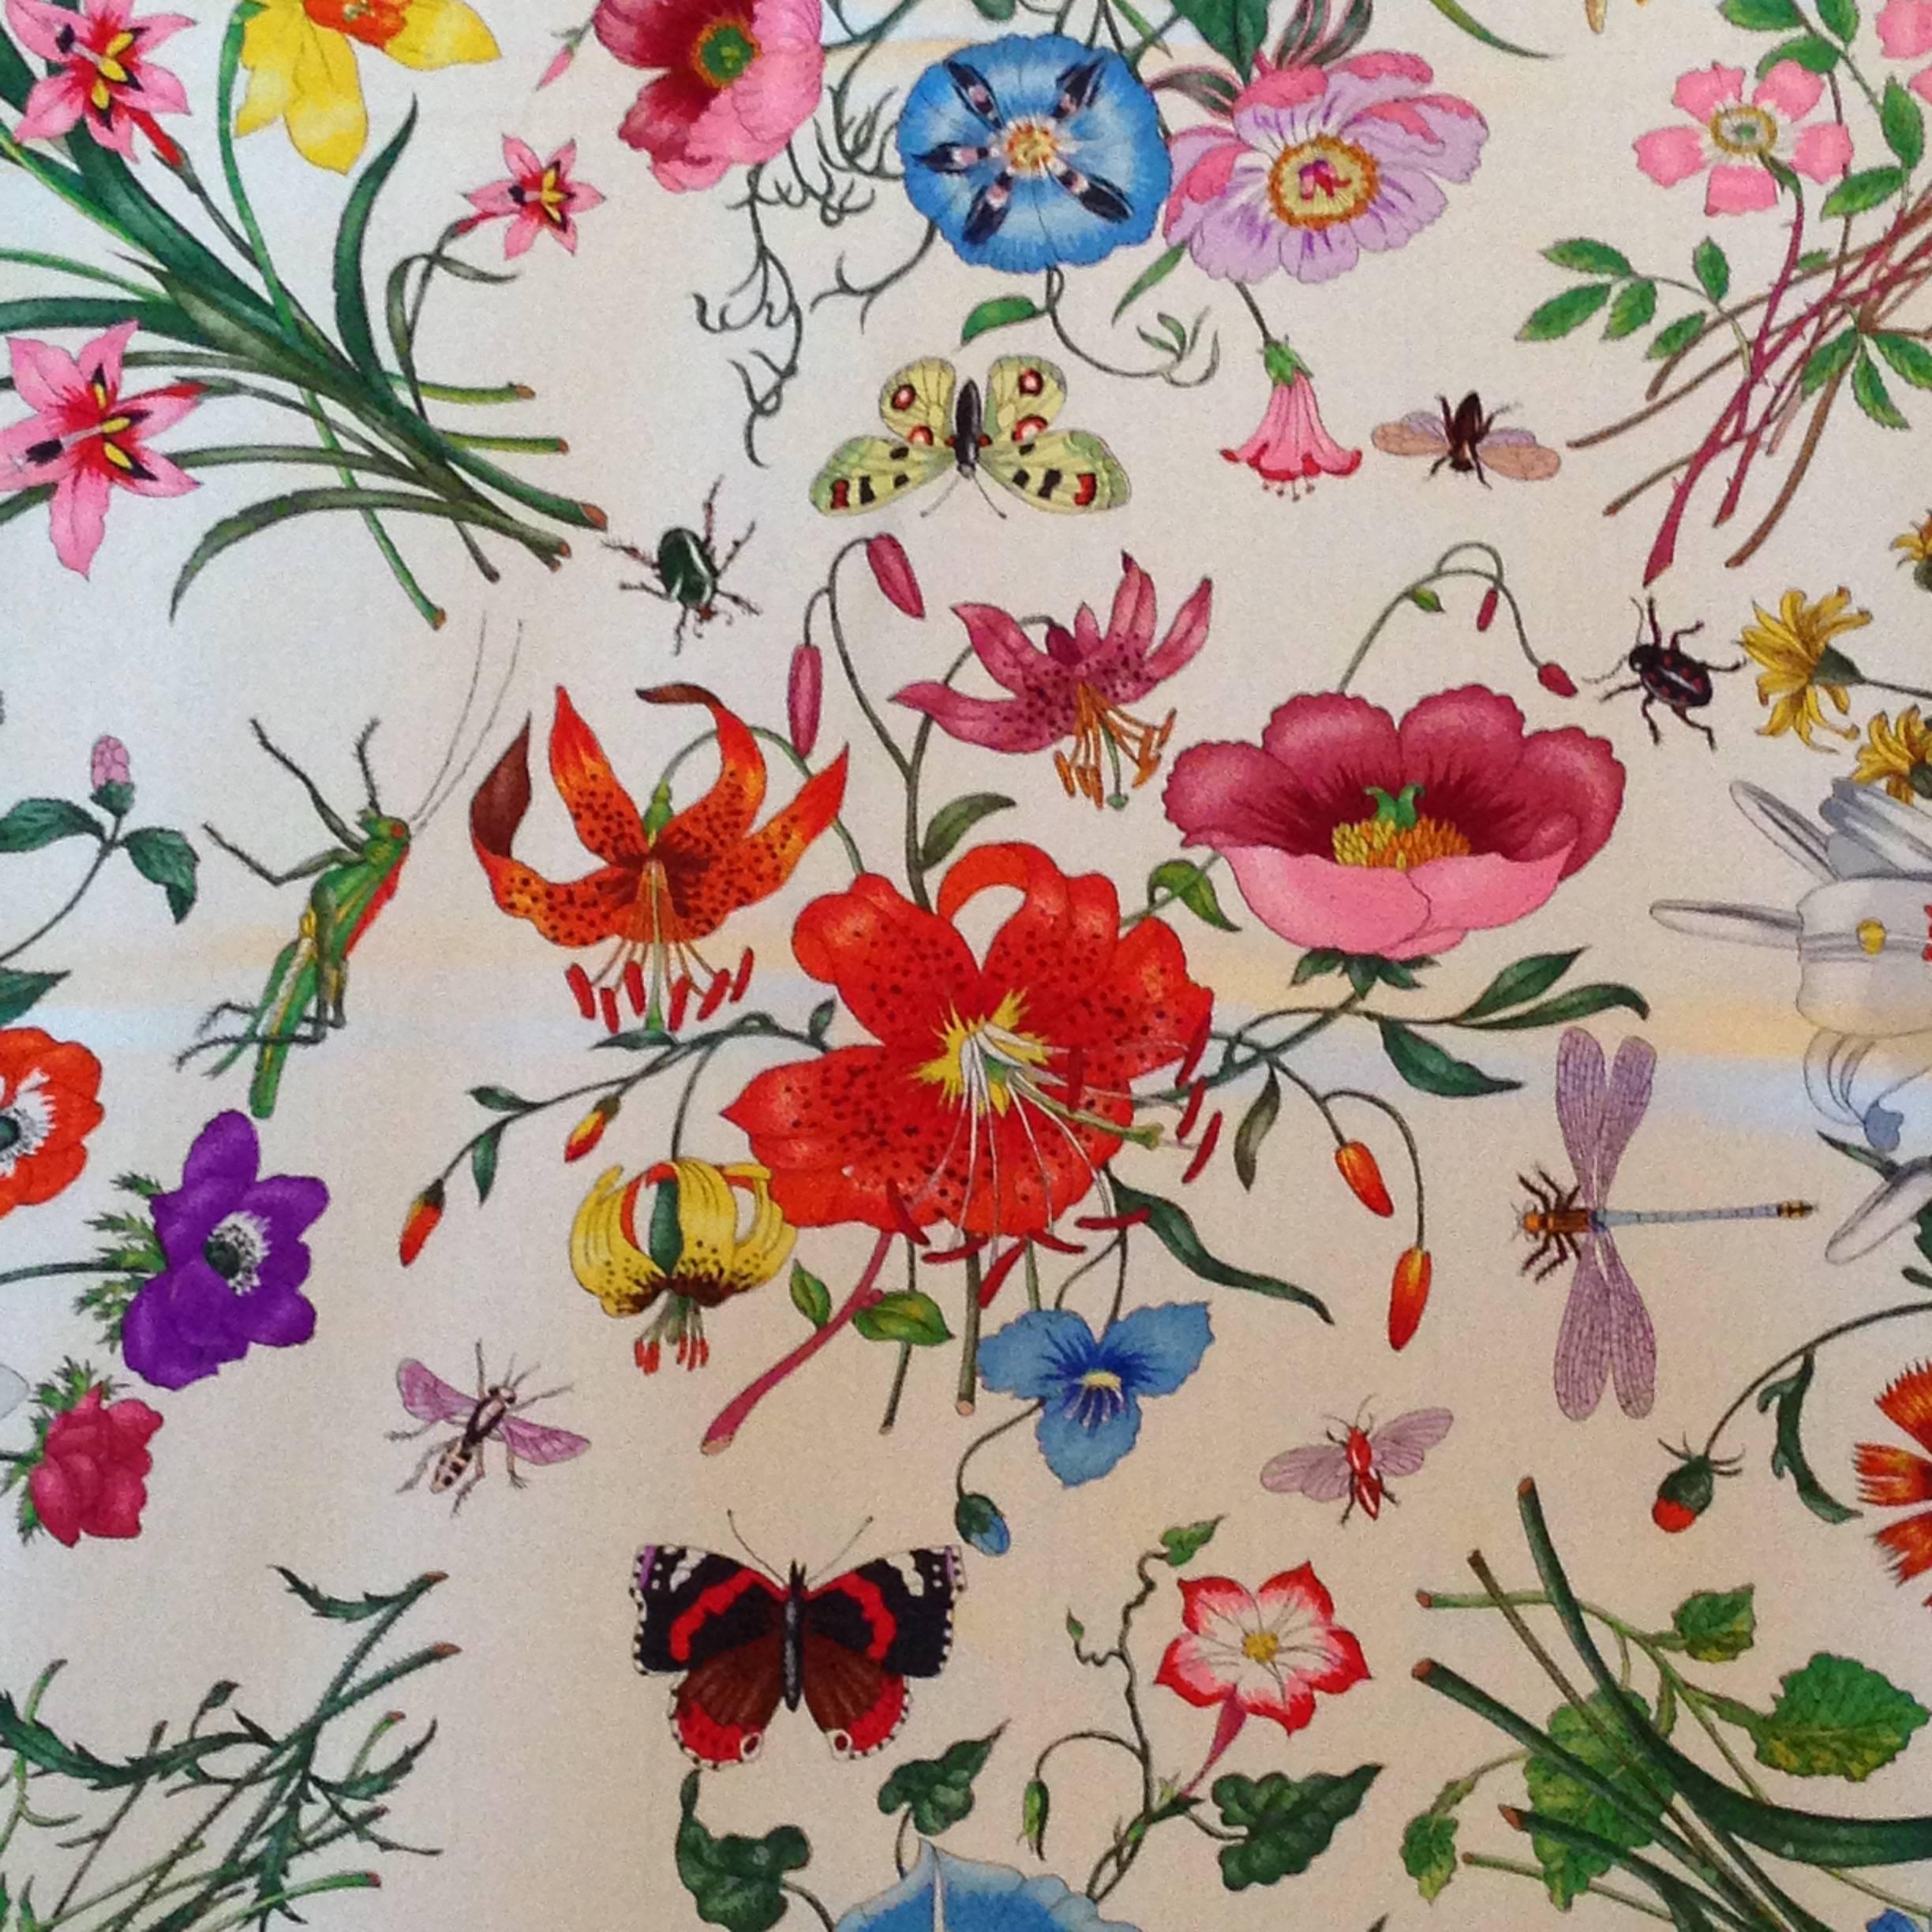 This fabulous 1980s silk Gucci scarf features the iconic 'Flora' pattern which was created by artist, Vittorio Accornero in 1965 as a gift for Princess Grace Kelly. It has a pink border and measures 34